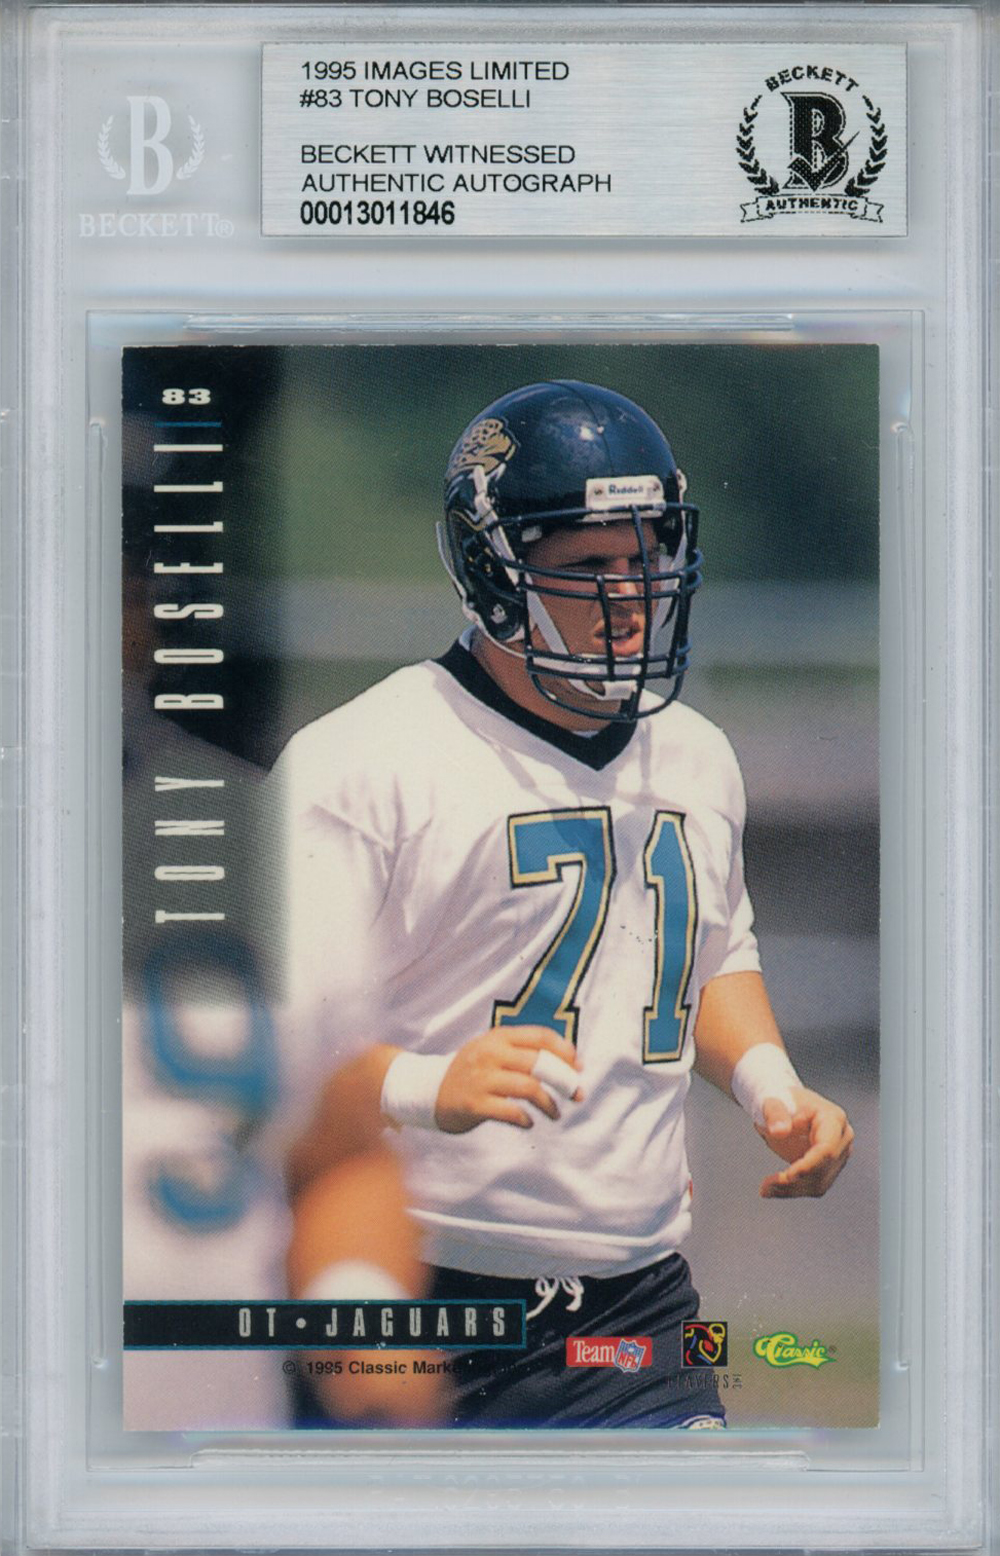 Tony Boselli Autographed/Signed 1995 Images Limited Rookie Card BAS Slab